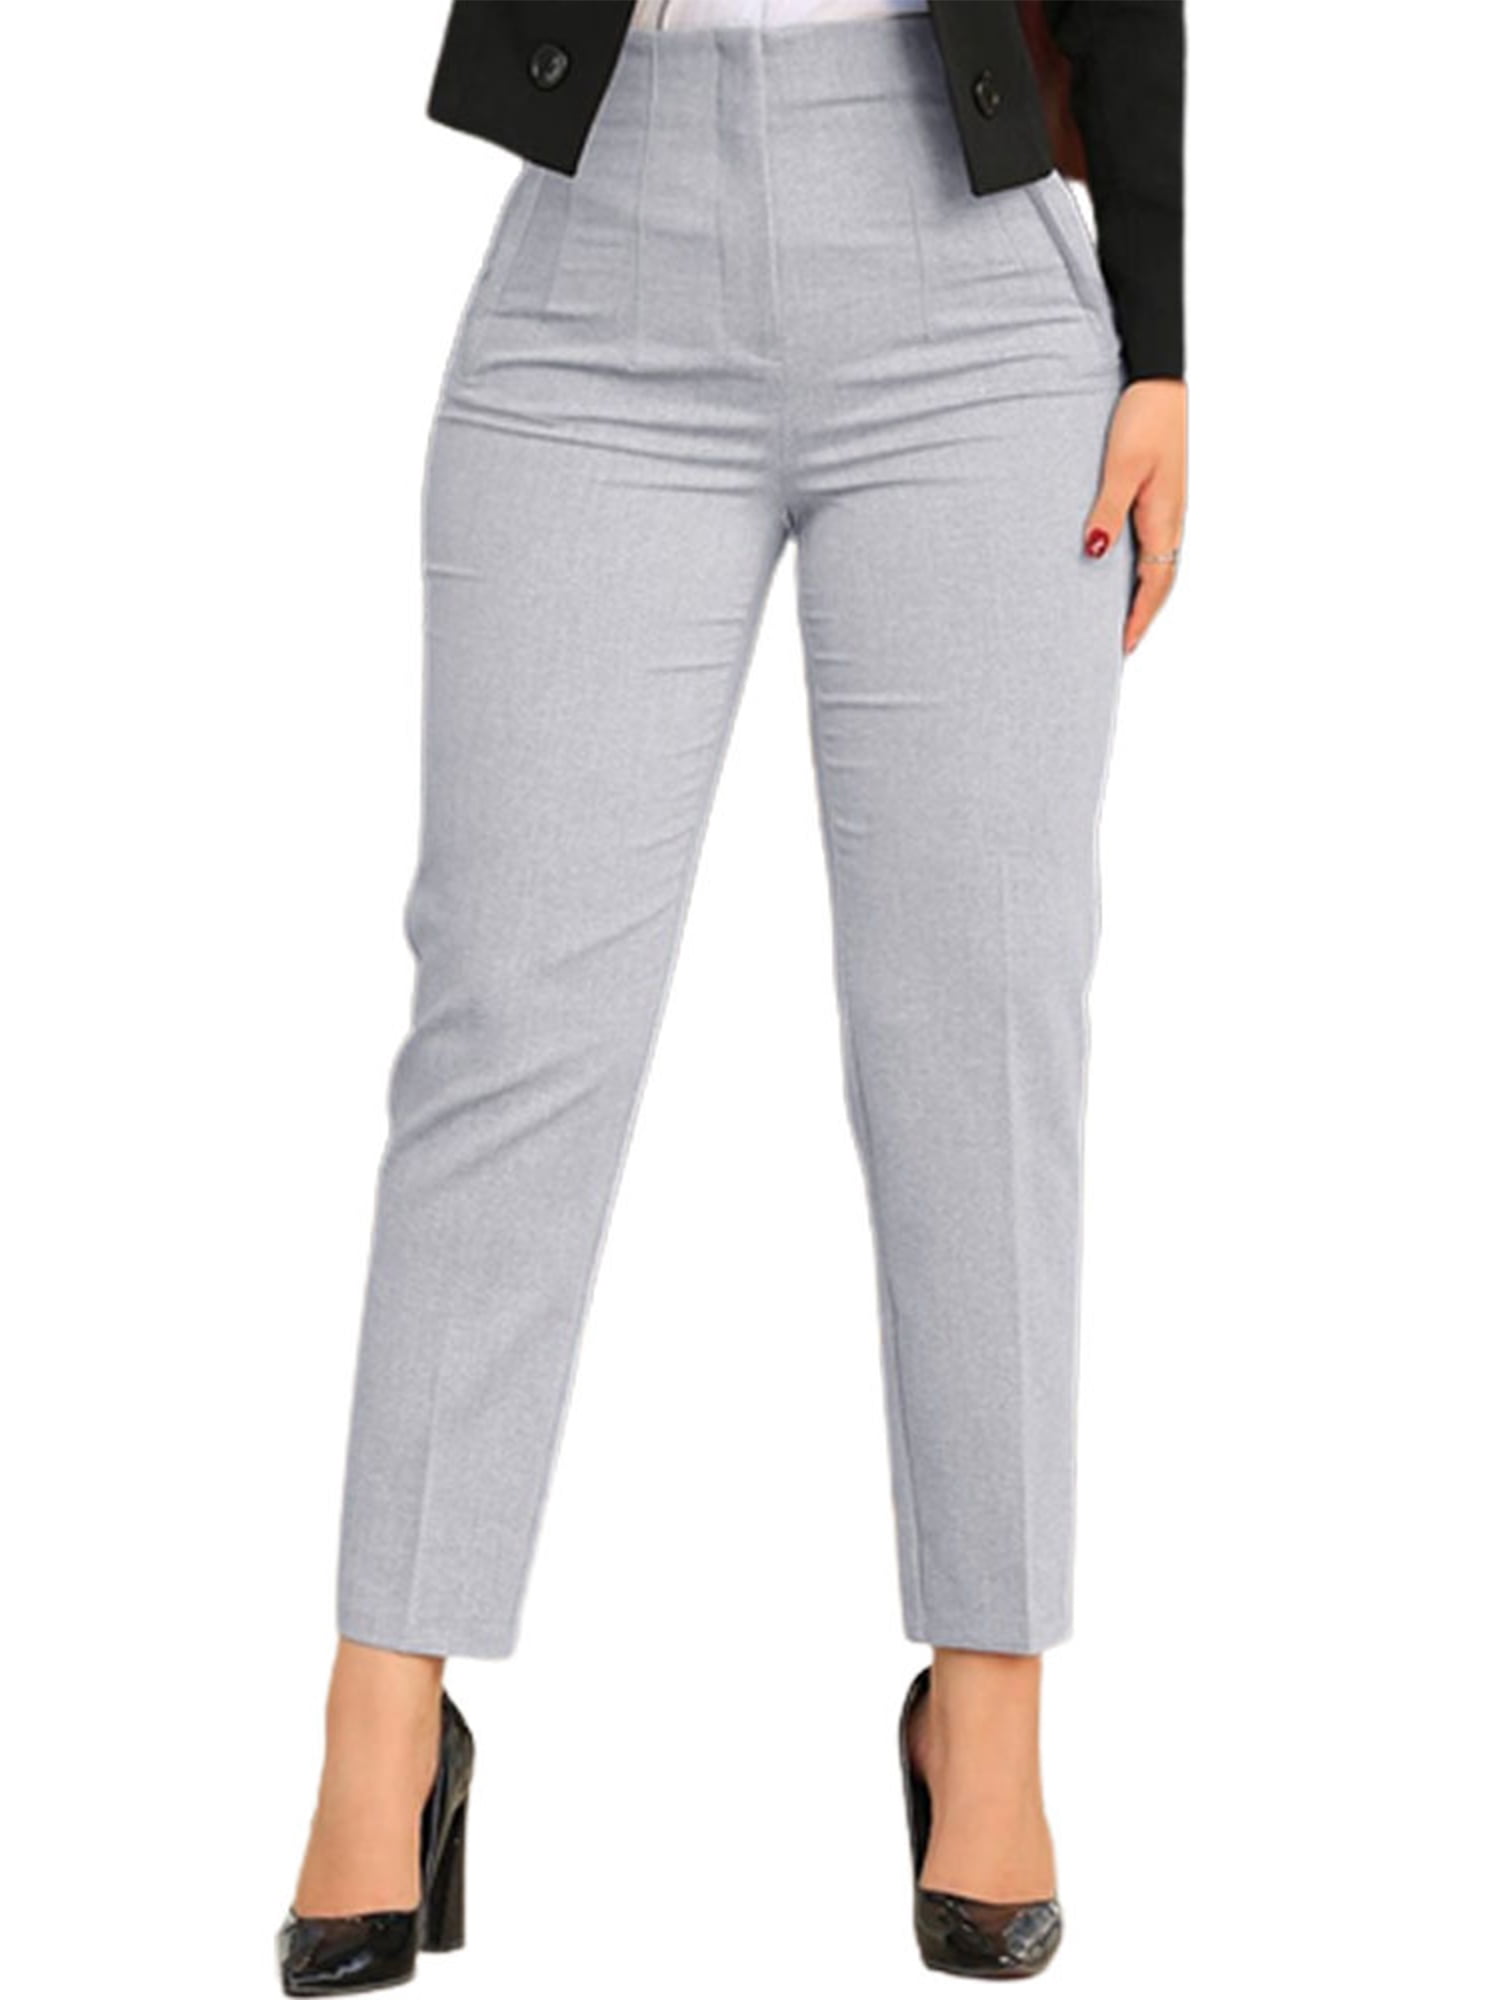 Glonme Women Pants Straight Leg Trousers High Waist Bottoms Daily Wear  Baggy Pant Regular Fit Solid Color Light Gray XL 